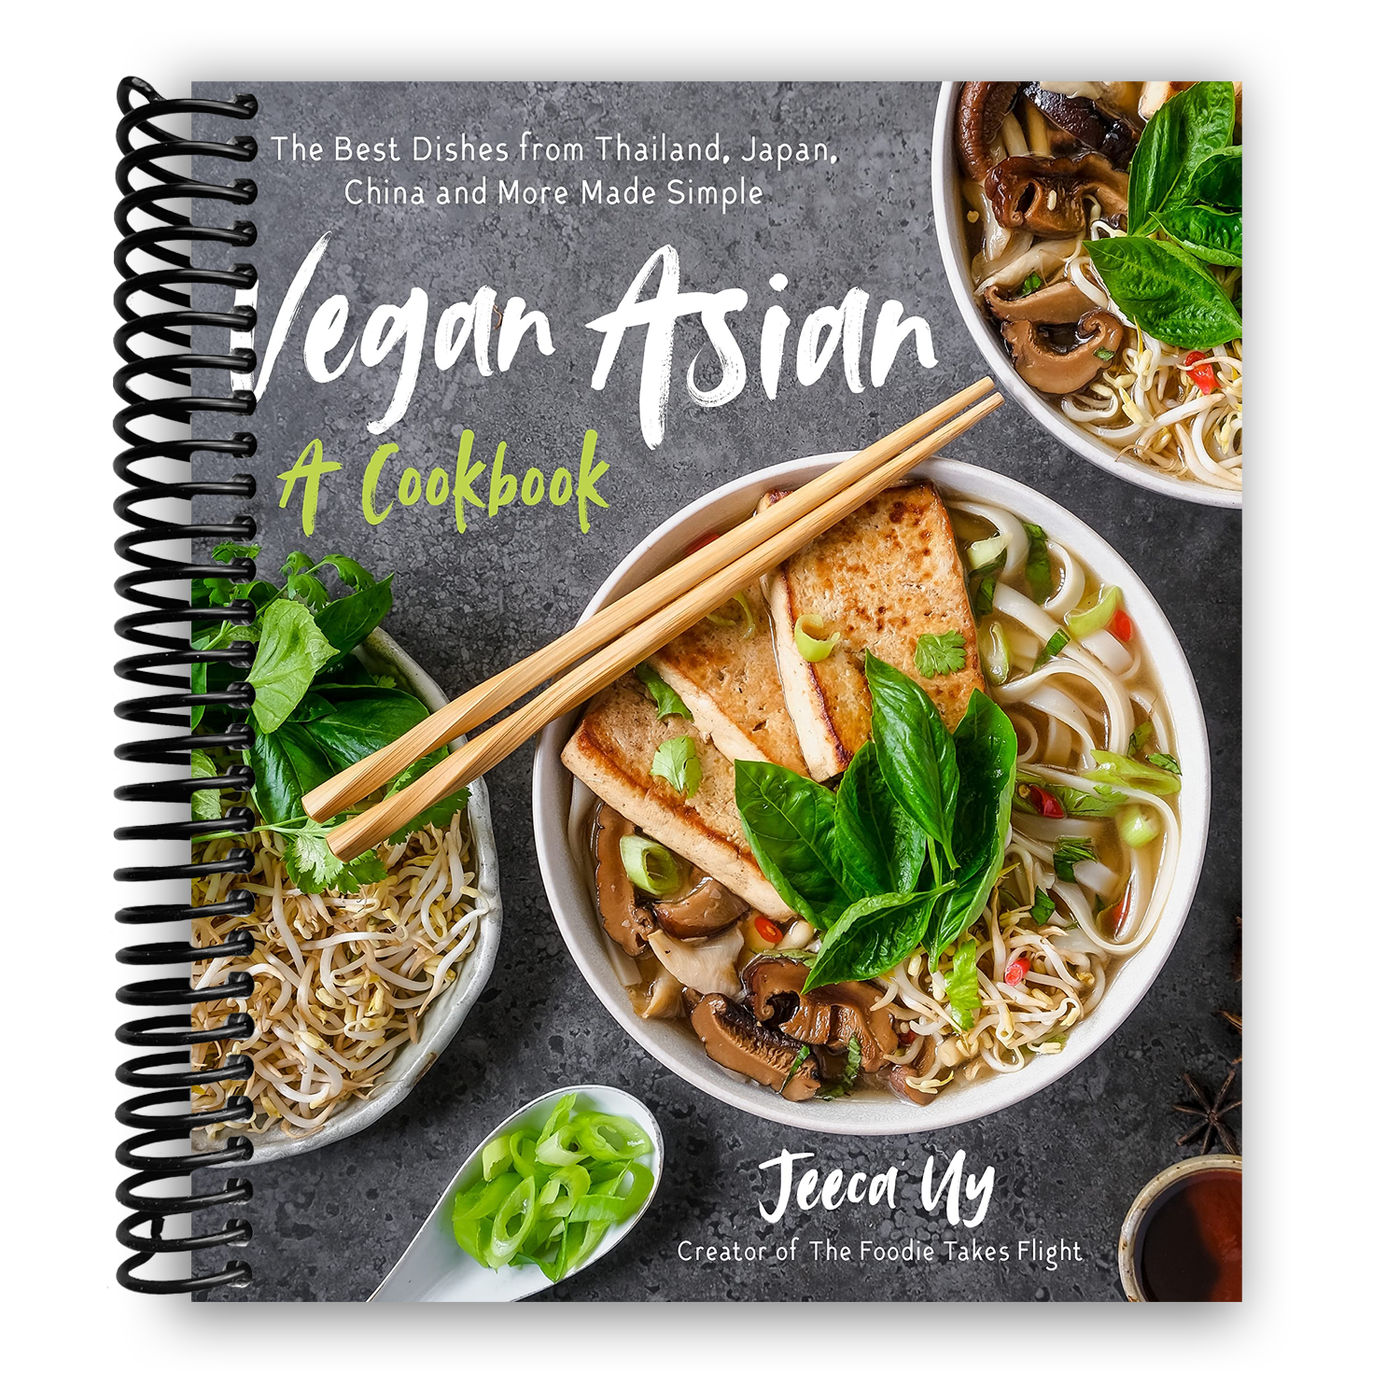 Vegan Asian: A Cookbook: The Best Dishes from Thailand, Japan, China and More Made Simple (Spiral Bound)